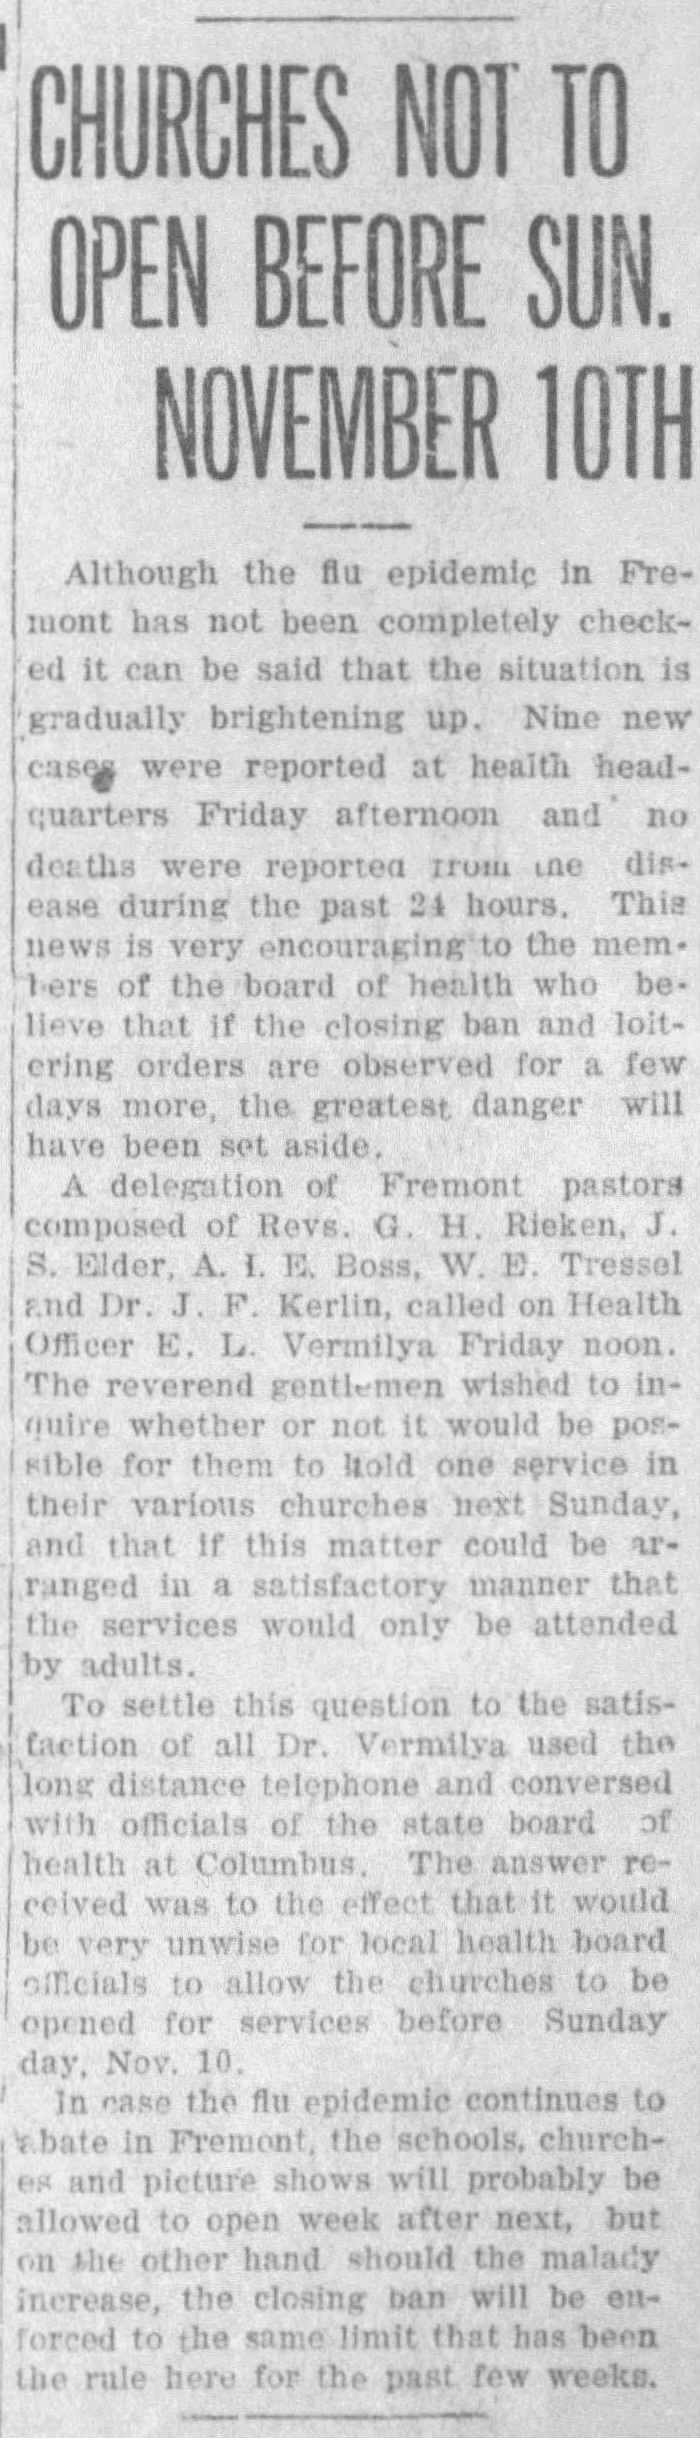 Churches in an Ohio city are closed in fall of 1918 to prevent spread of Spanish flu